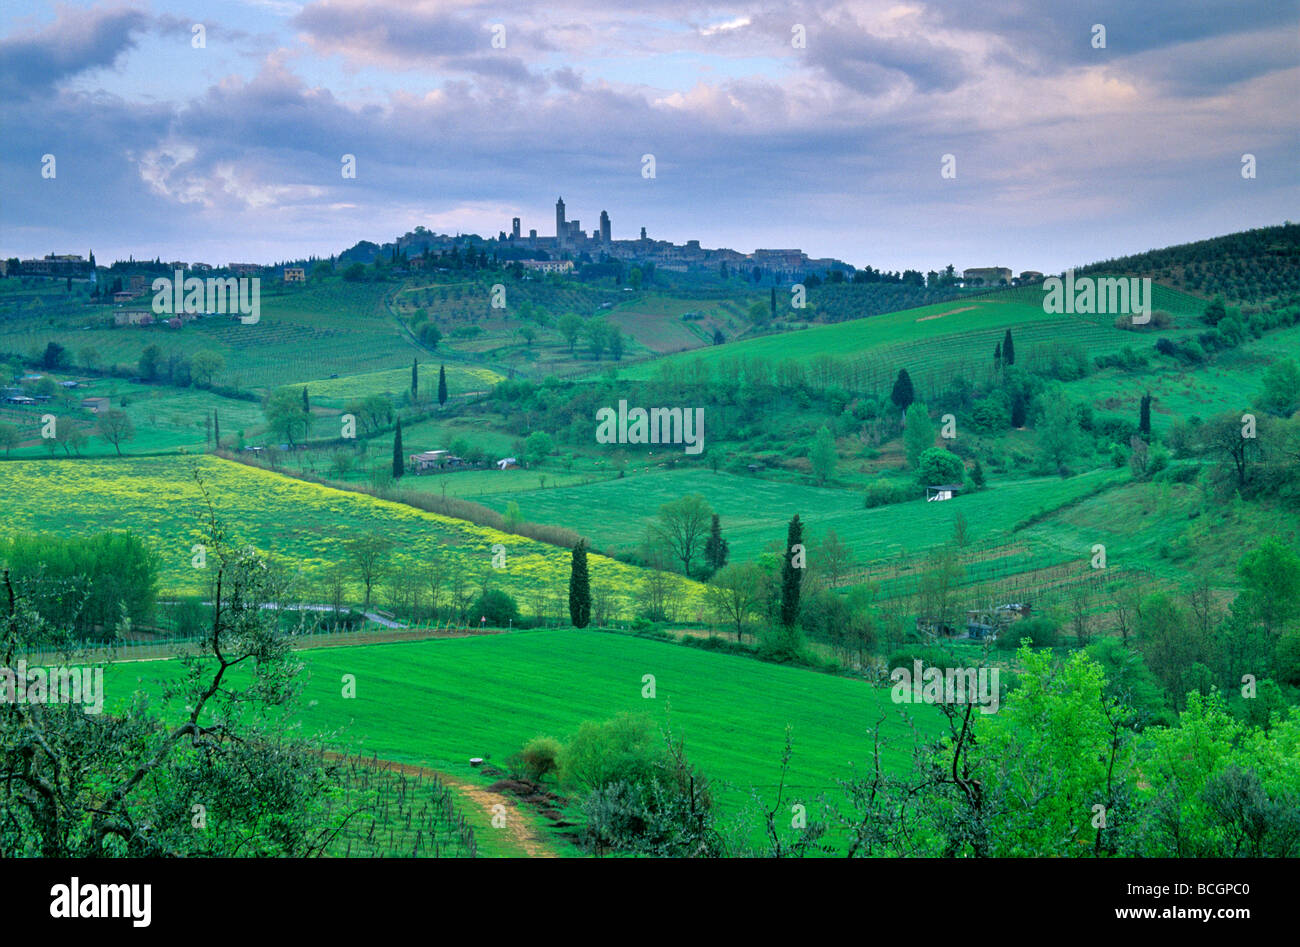 Landscape of Tuscany with Medieval hilltop town of San Gimignano Tuscany Italy BEAN ALPix 0097 Stock Photo